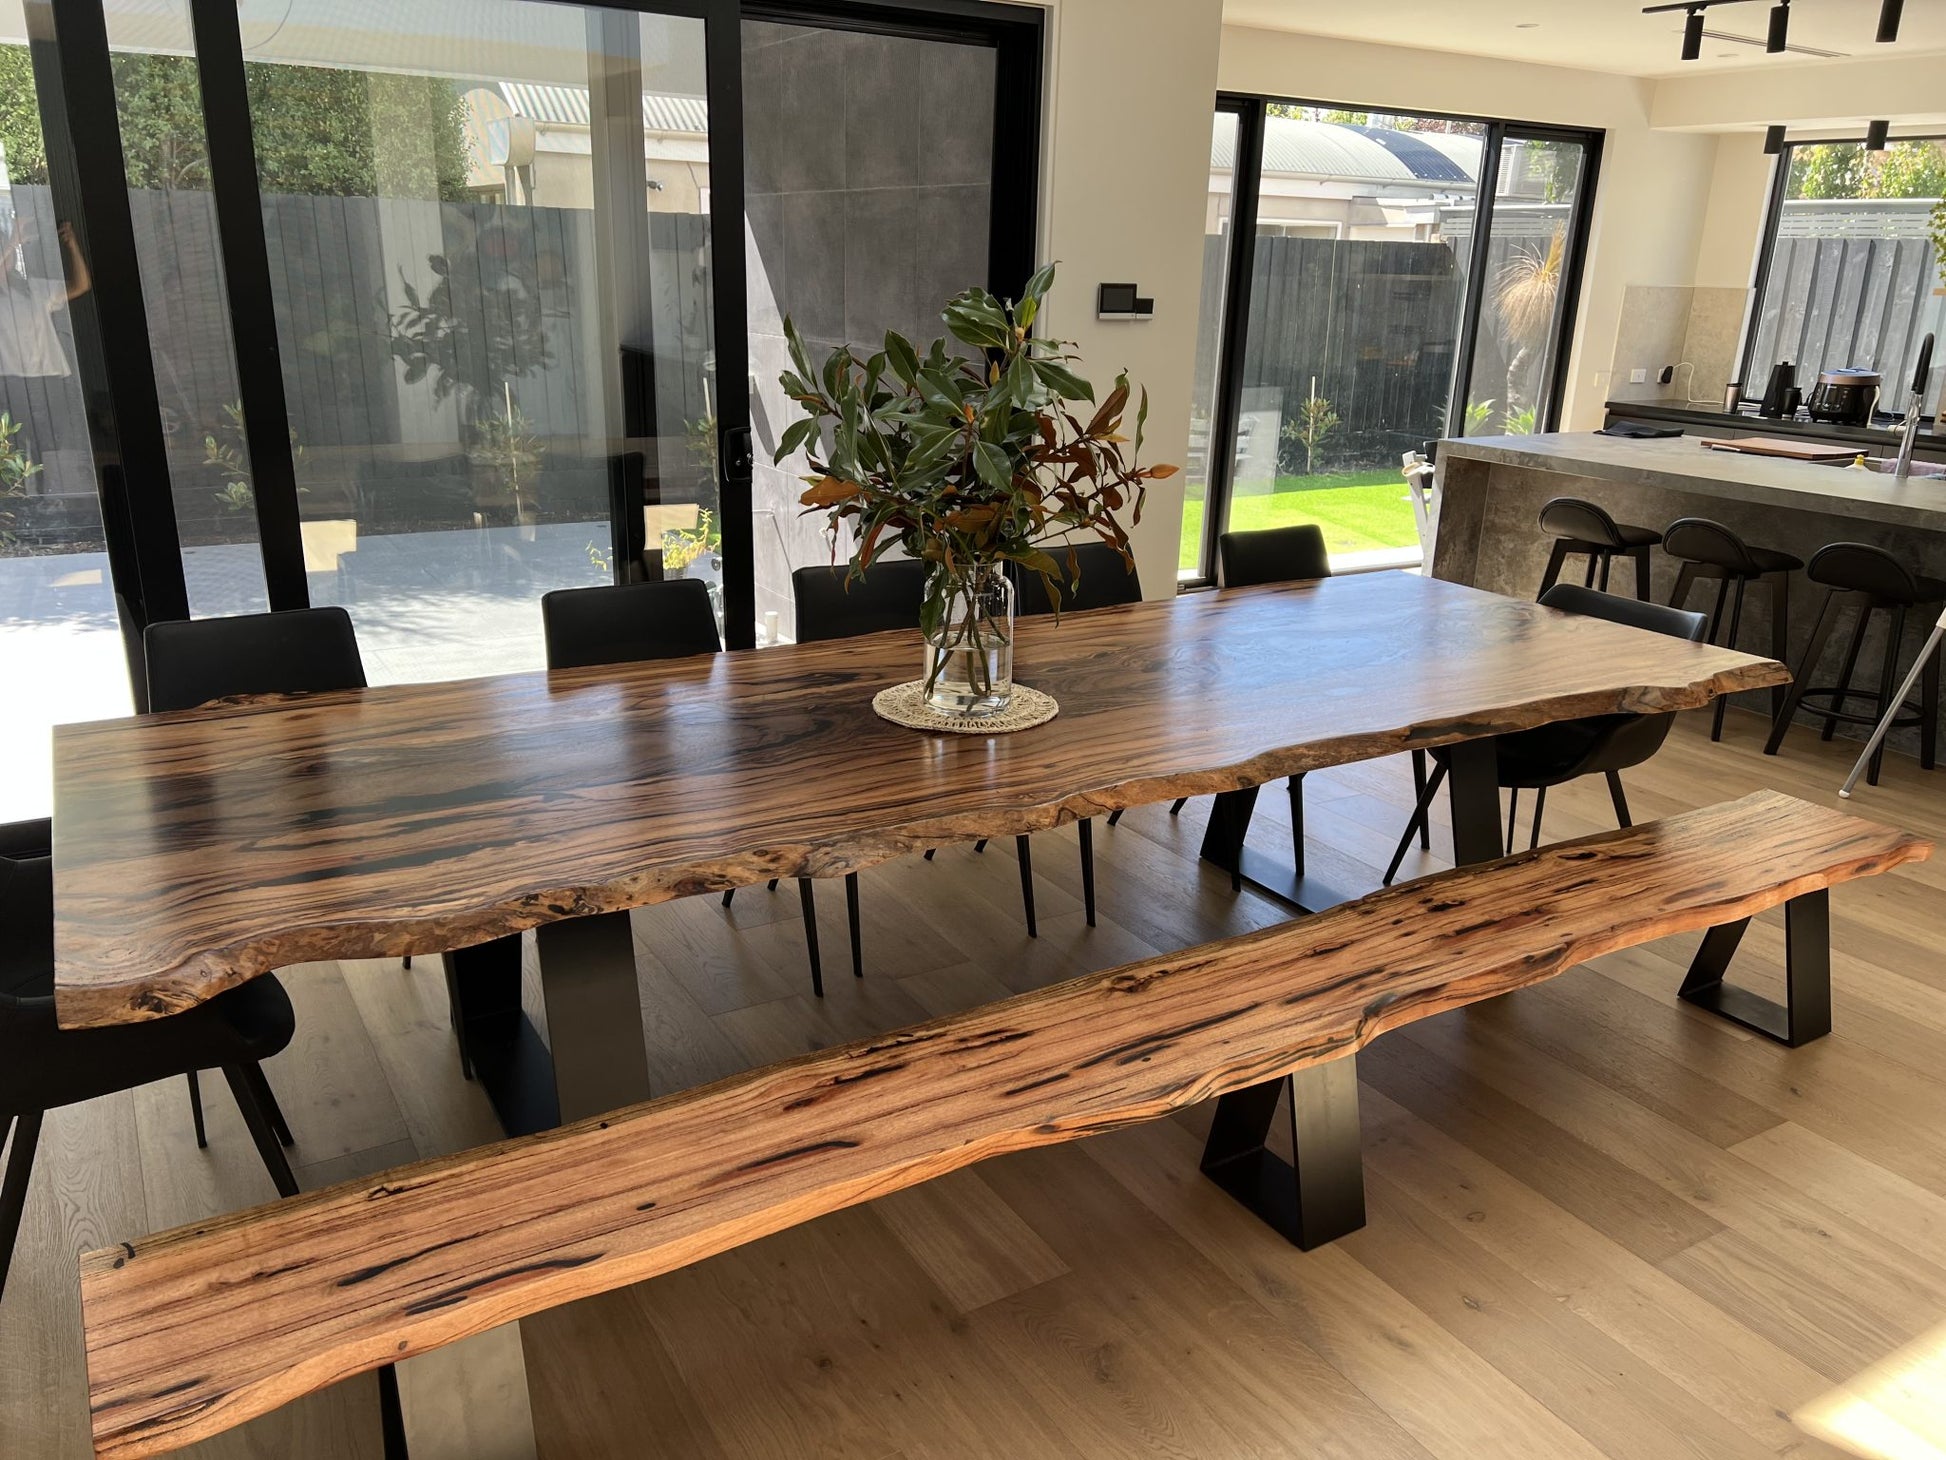 Marri Dining Table with bench seat